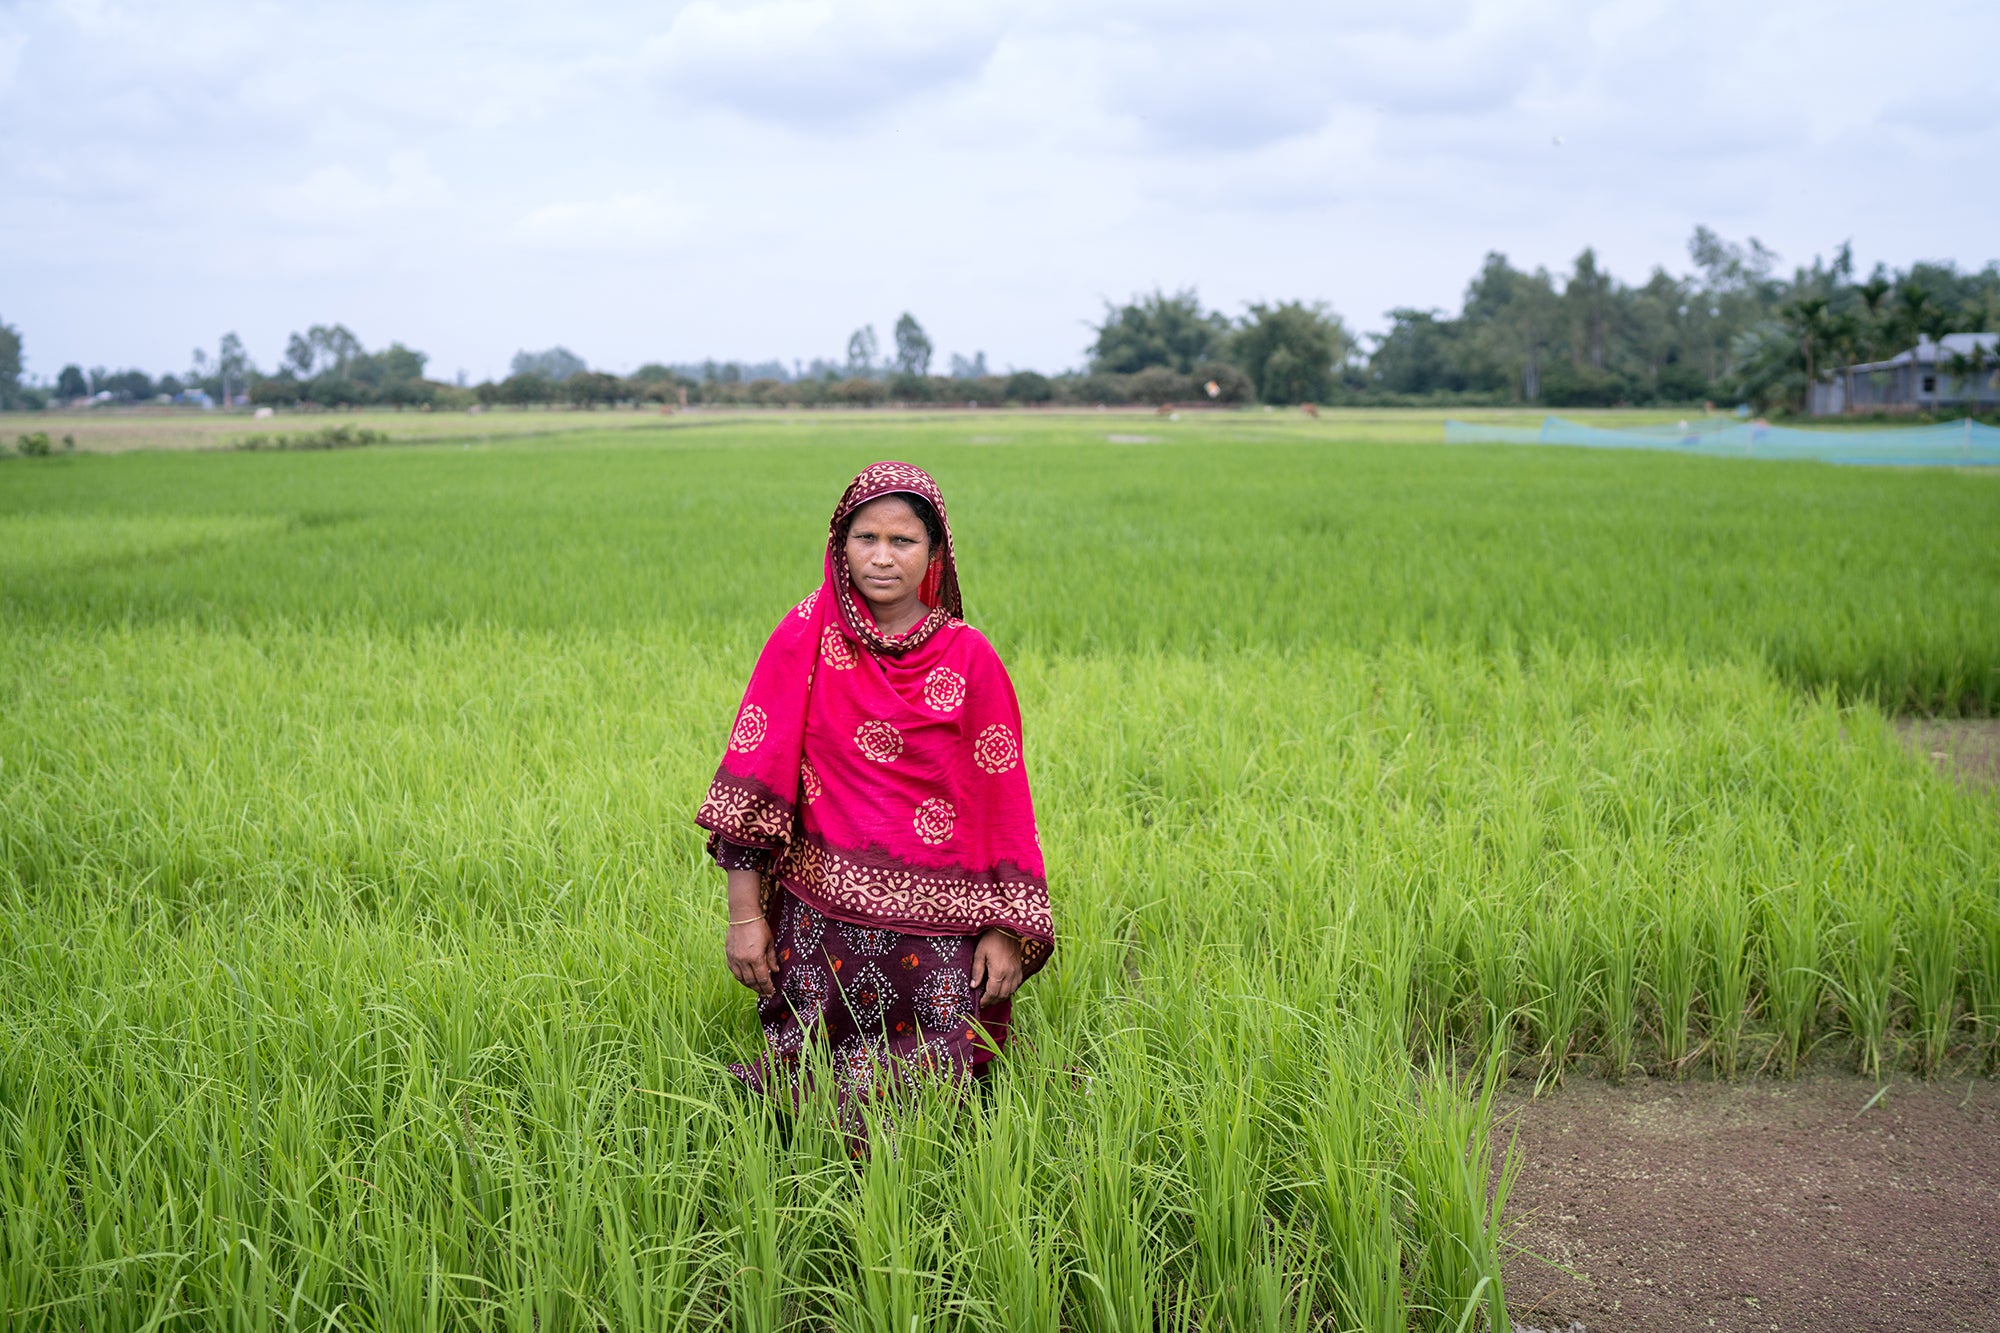 Rozina has been able to shield her family from the inflated prices of products on the market by producing her own seeds, growing vegetables using a self-made organic fertiliser and selling her produce